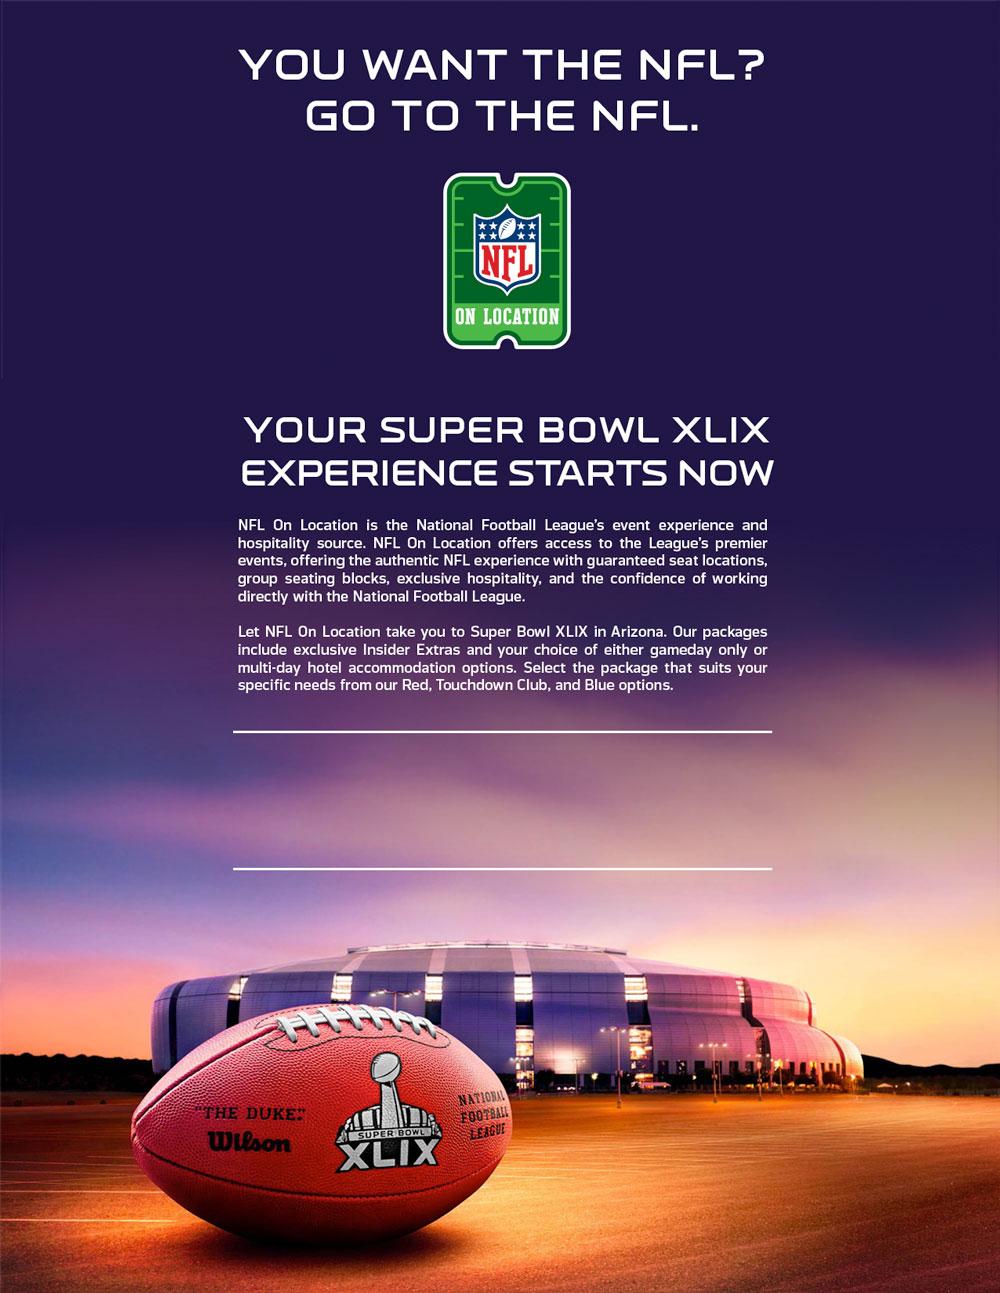 NFL ON LOCATION PROVIDES UNIQUE AND UNPARALLELED ACCESS TO SELECT NFL EVENTS THROUGHOUT THE